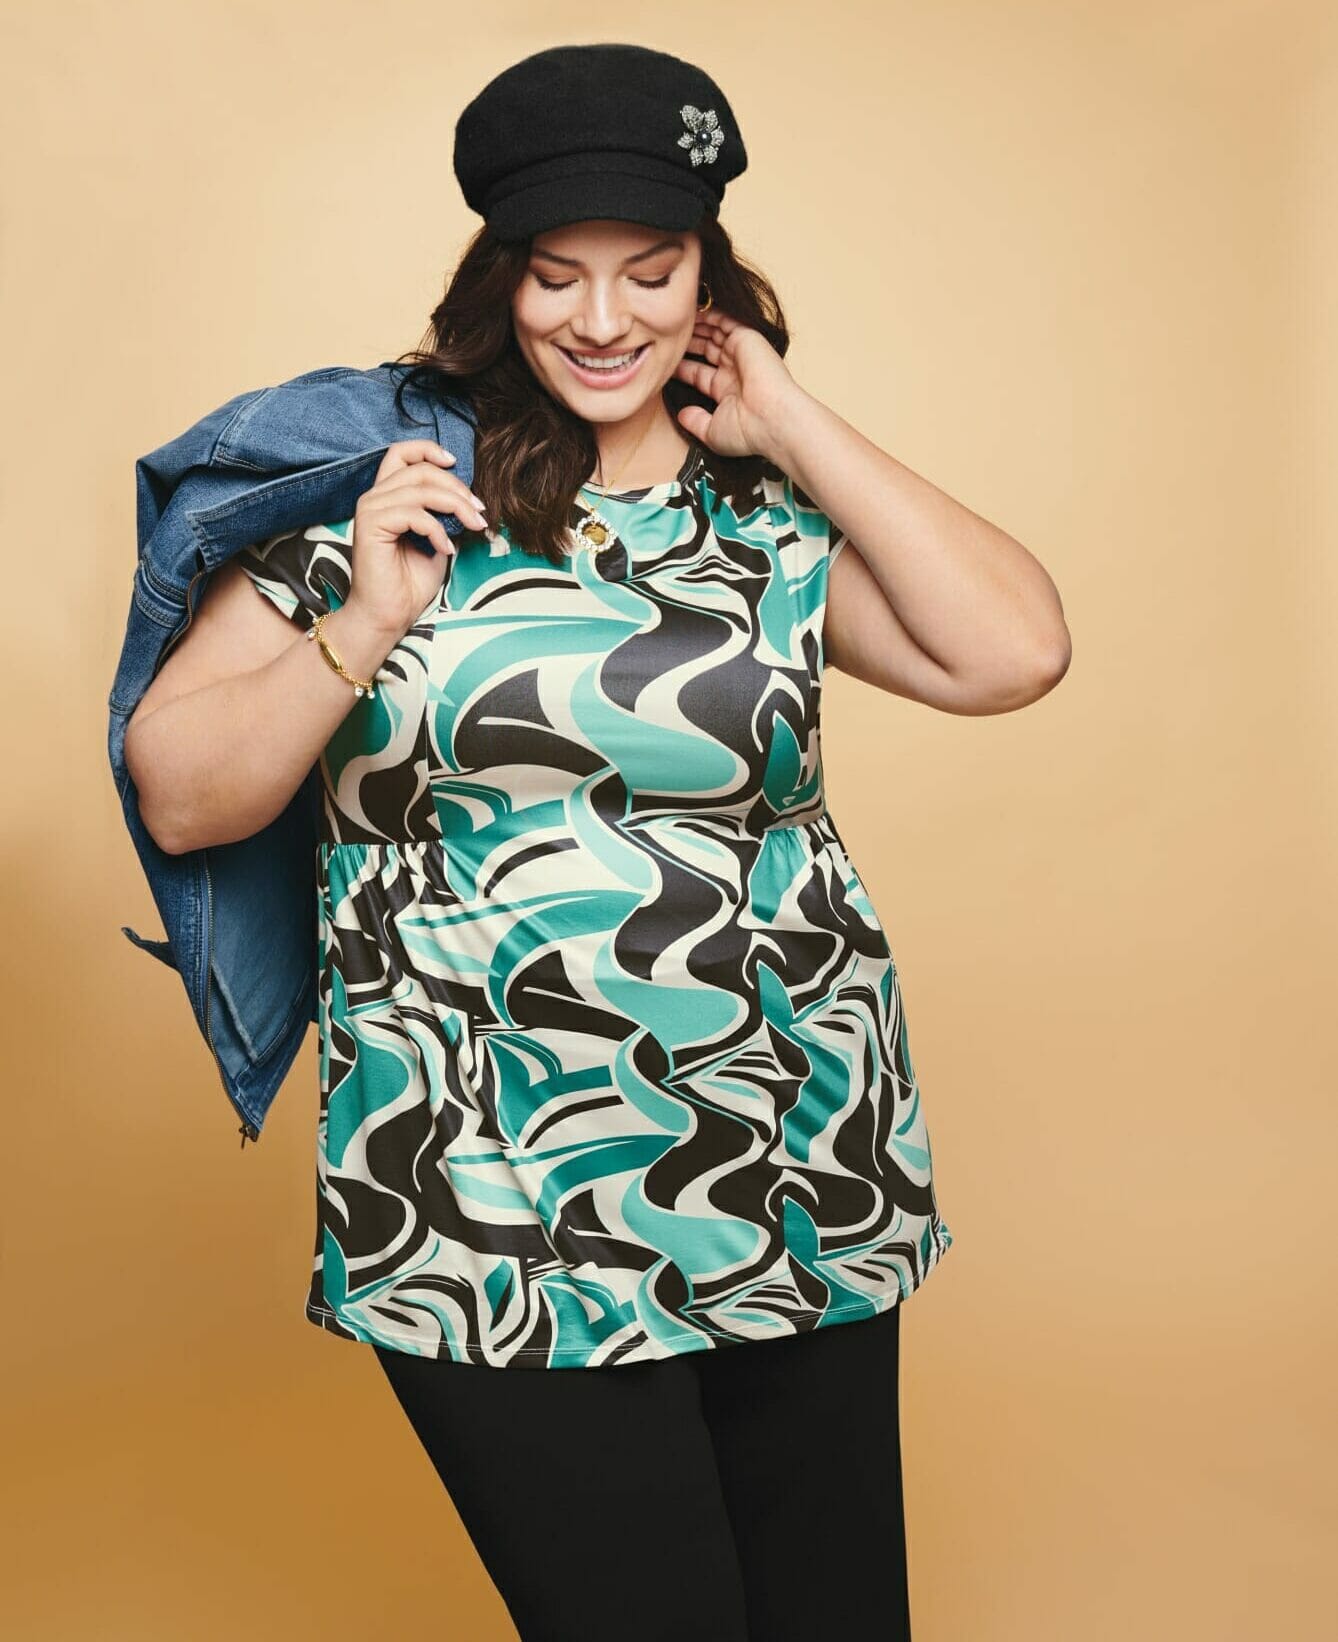 plus size model wearing a blue and black printed shirt with a black cap.